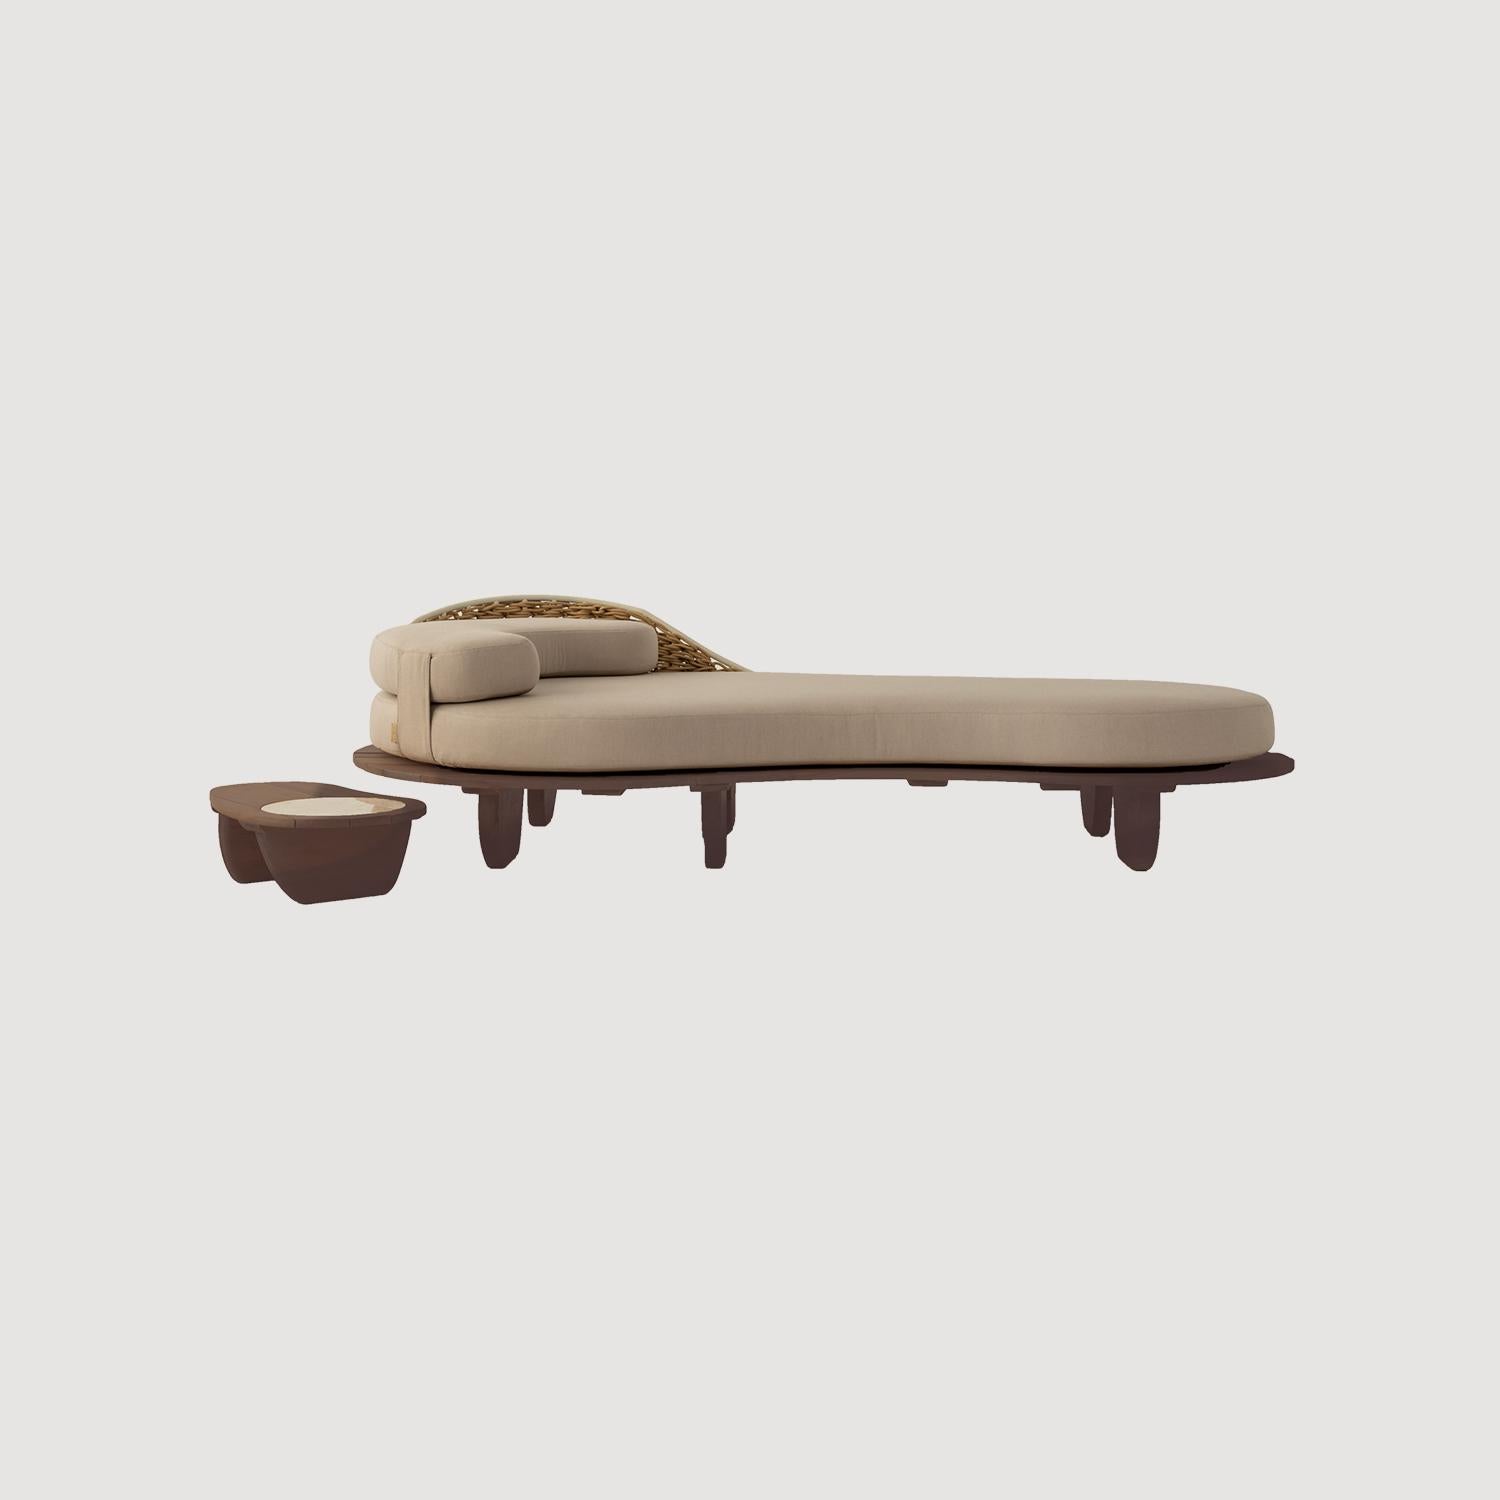 The Sayari Indoor / Outdoor Daybed Chaise and Table Collection by Studio Lloyd For Sale 5